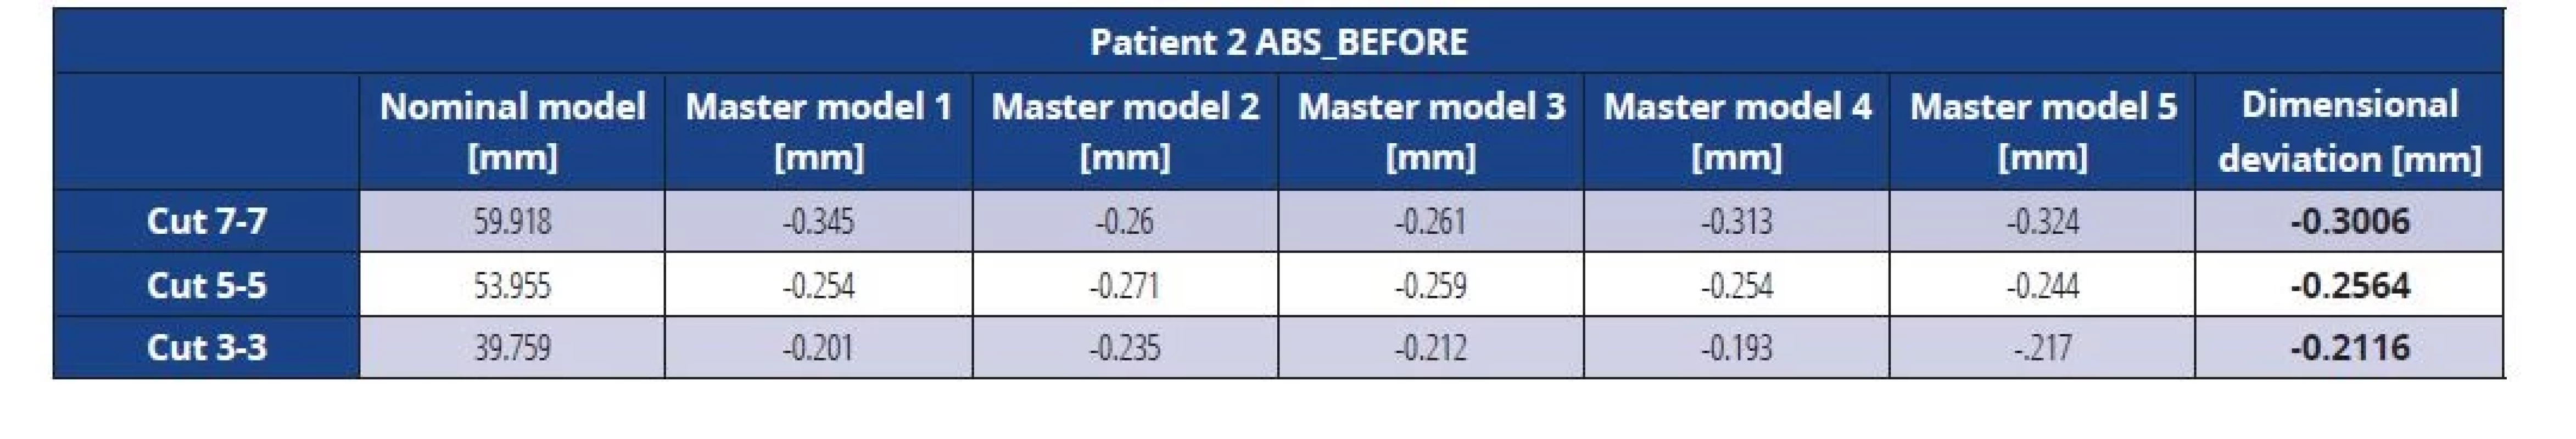 Dimensional deviations of the ABS master model before vacuuming (patient 2)